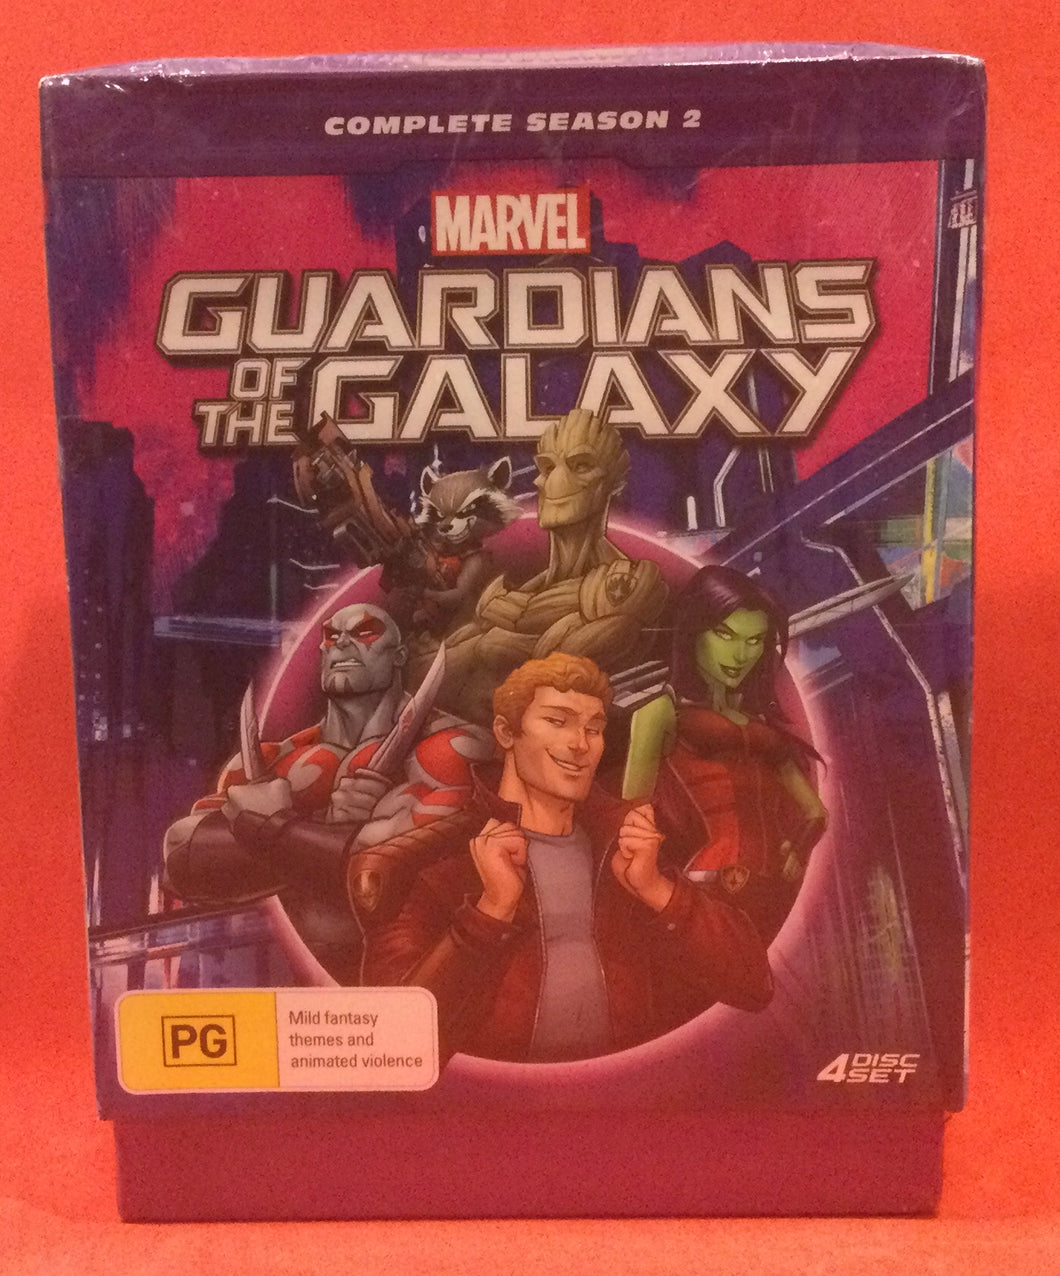 GUARDIANS OF THE GALAXY - COMPLETE SEASON 2 - 4 DVD DISCS (SEALED)